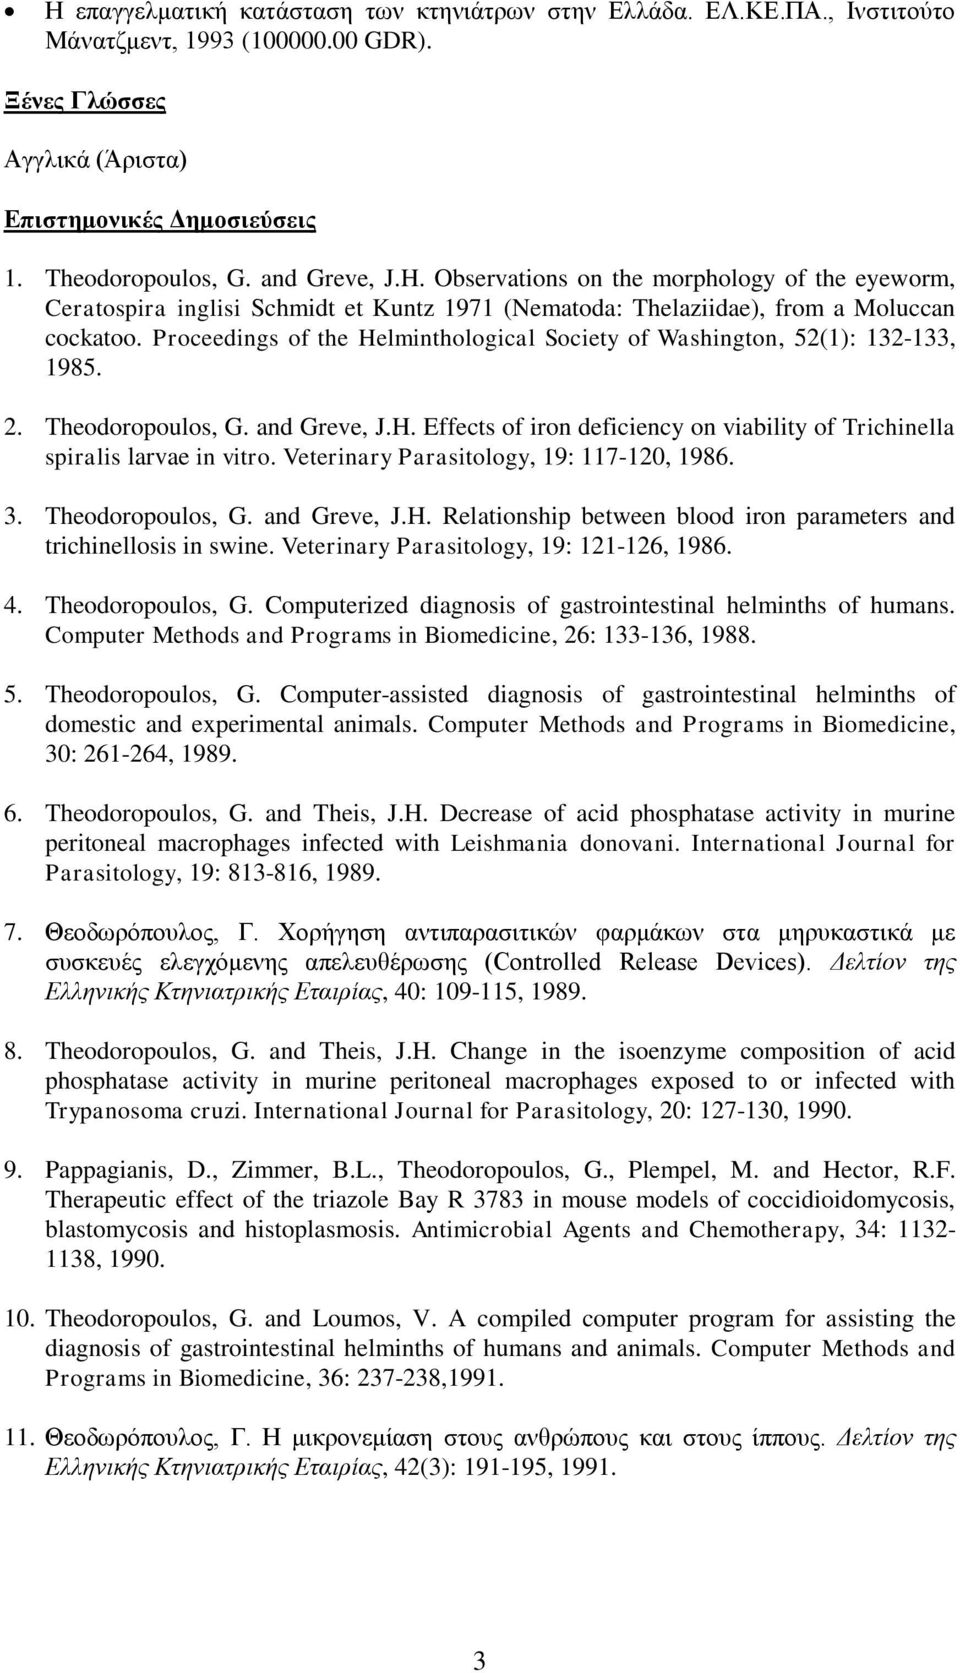 Proceedings of the Helminthological Society of Washington, 52(1): 132-133, 1985. 2. Theodoropoulos, G. and Greve, J.H. Effects of iron deficiency on viability of Trichinella spiralis larvae in vitro.